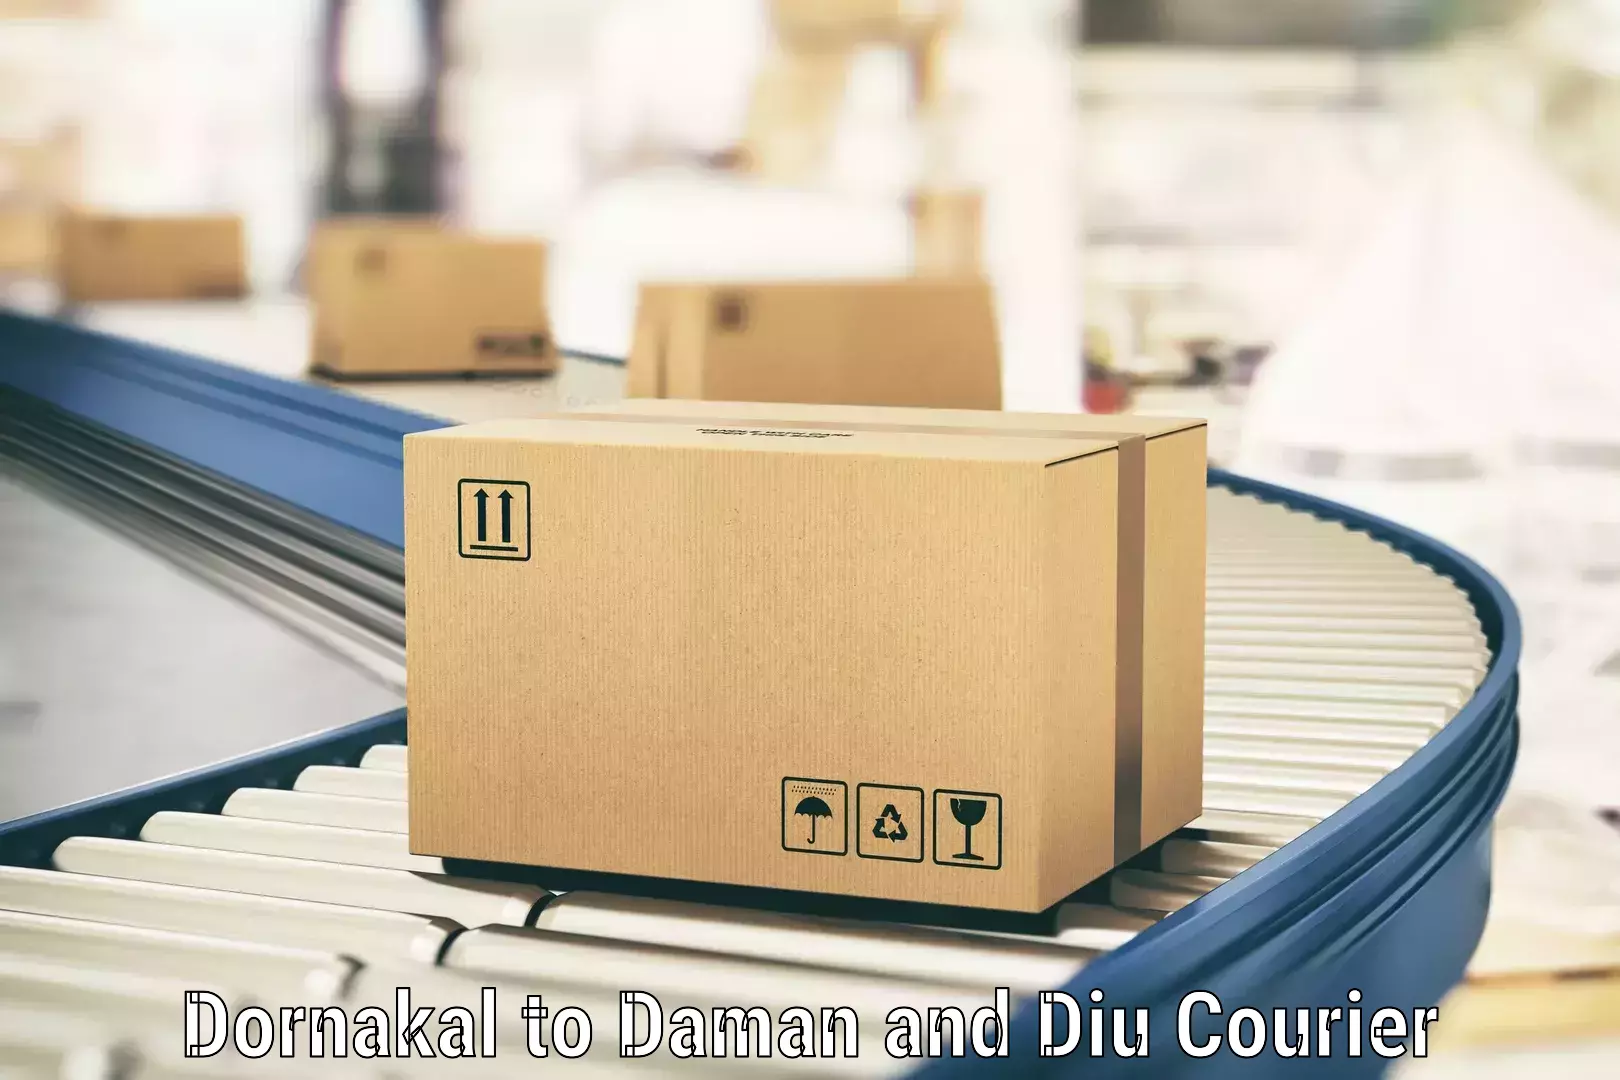 Efficient courier operations Dornakal to Daman and Diu